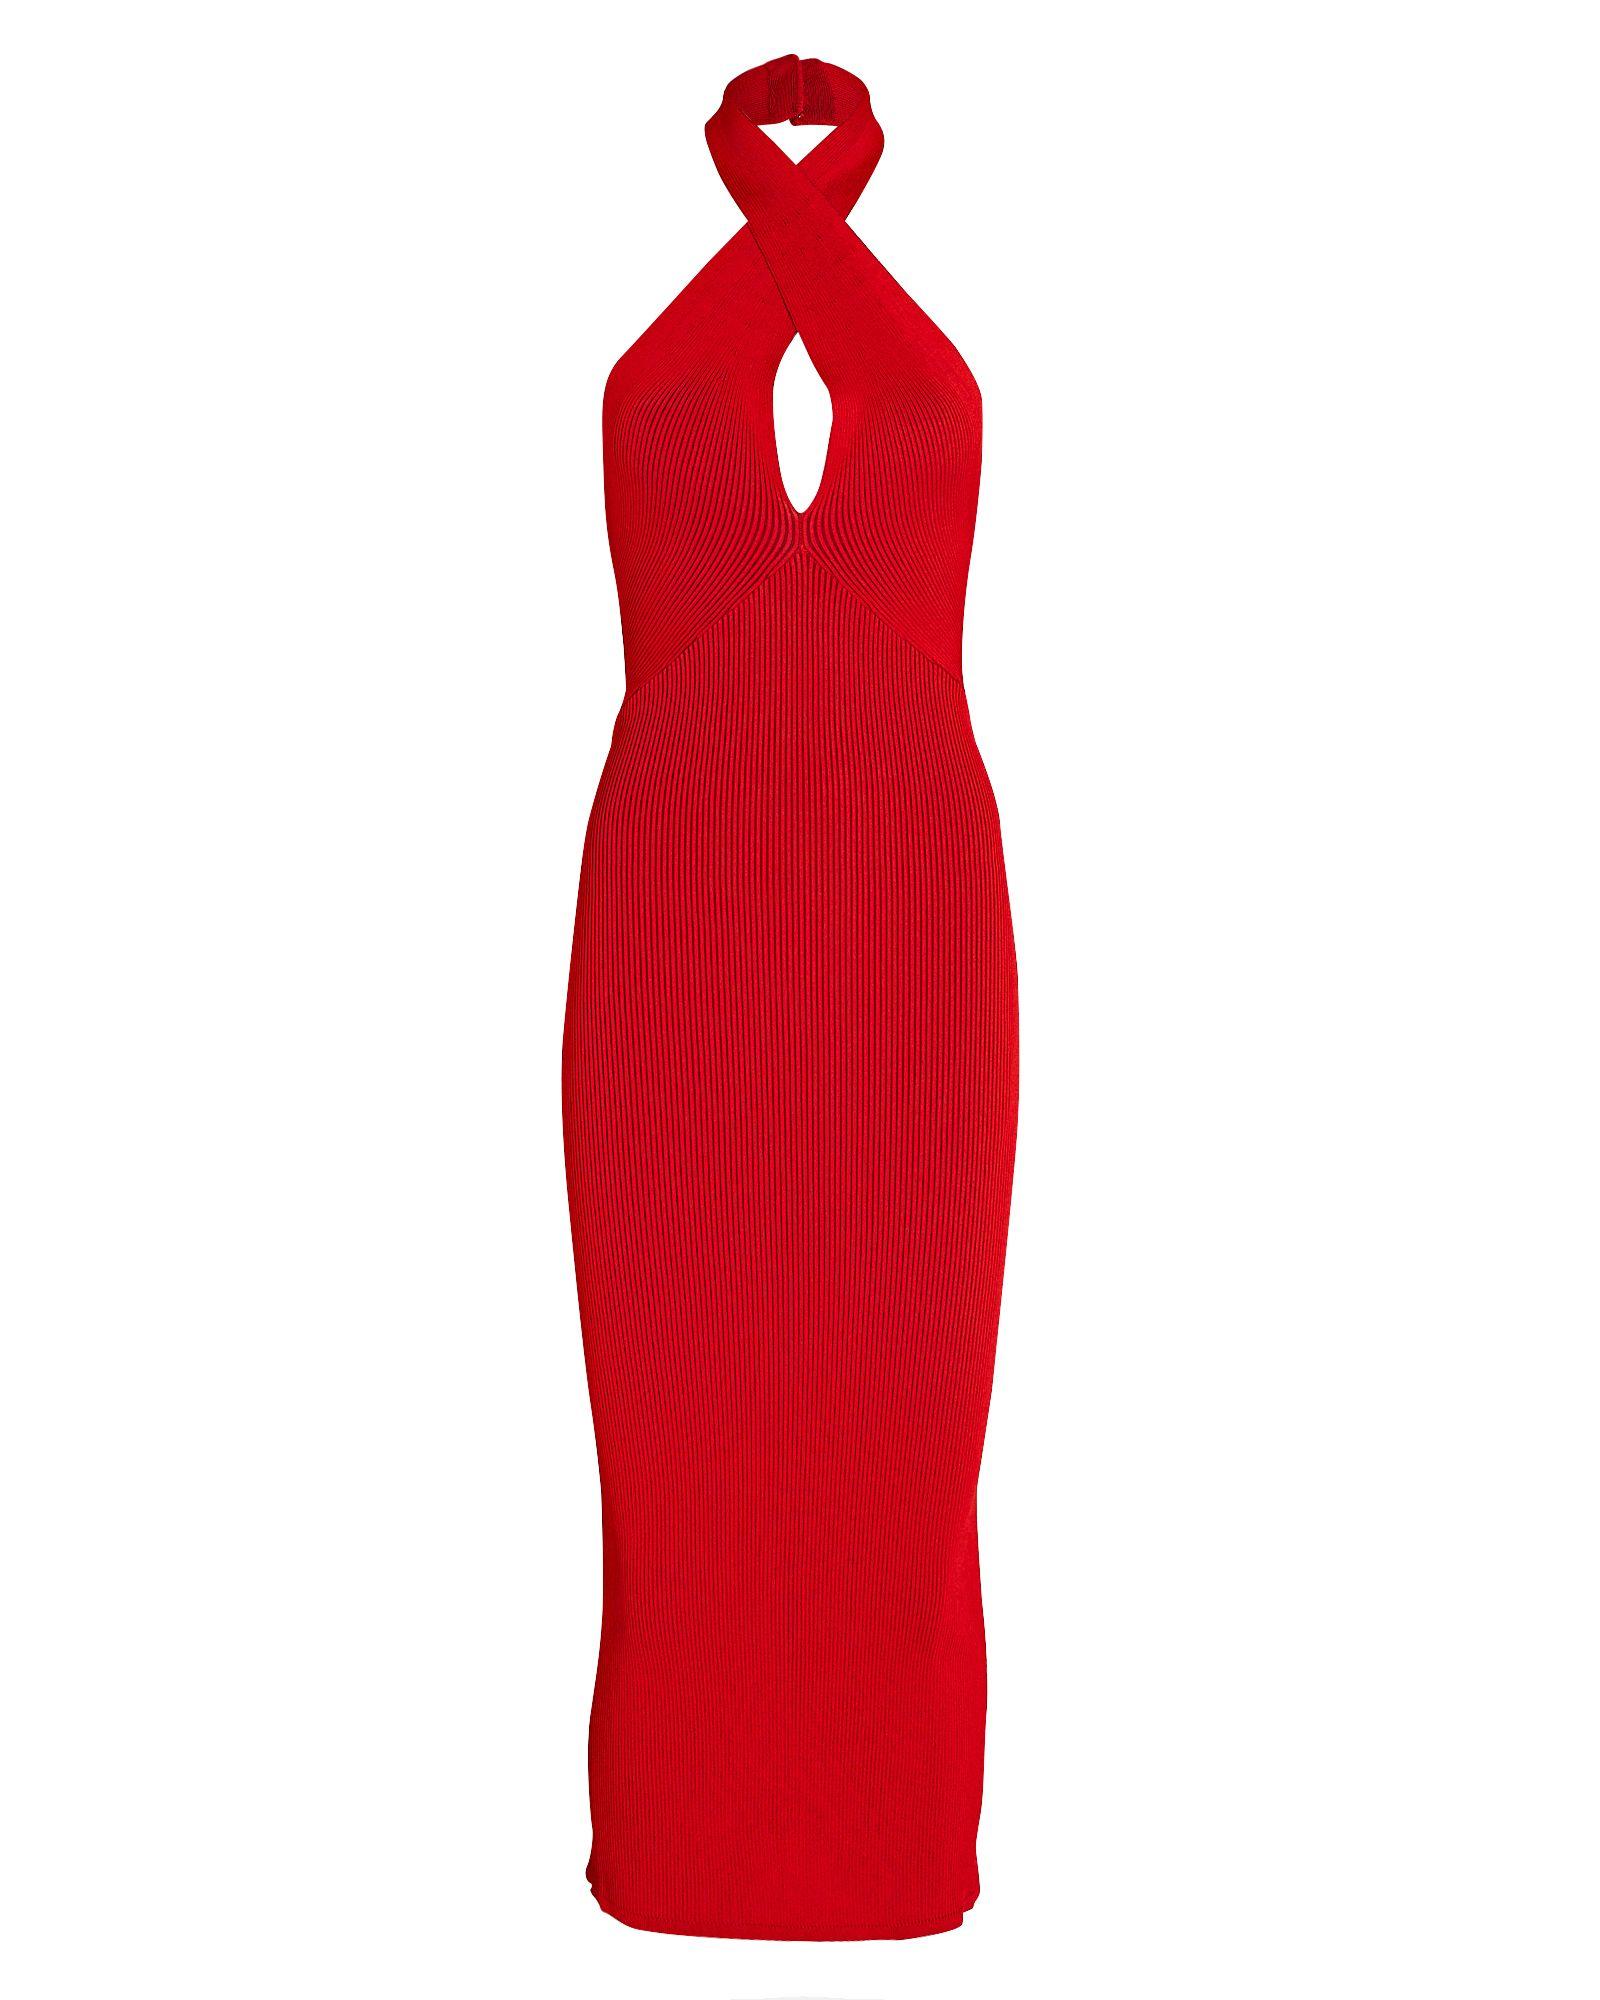 Alix Oliver Cross-front Knit Halter Dress in Red | Lyst